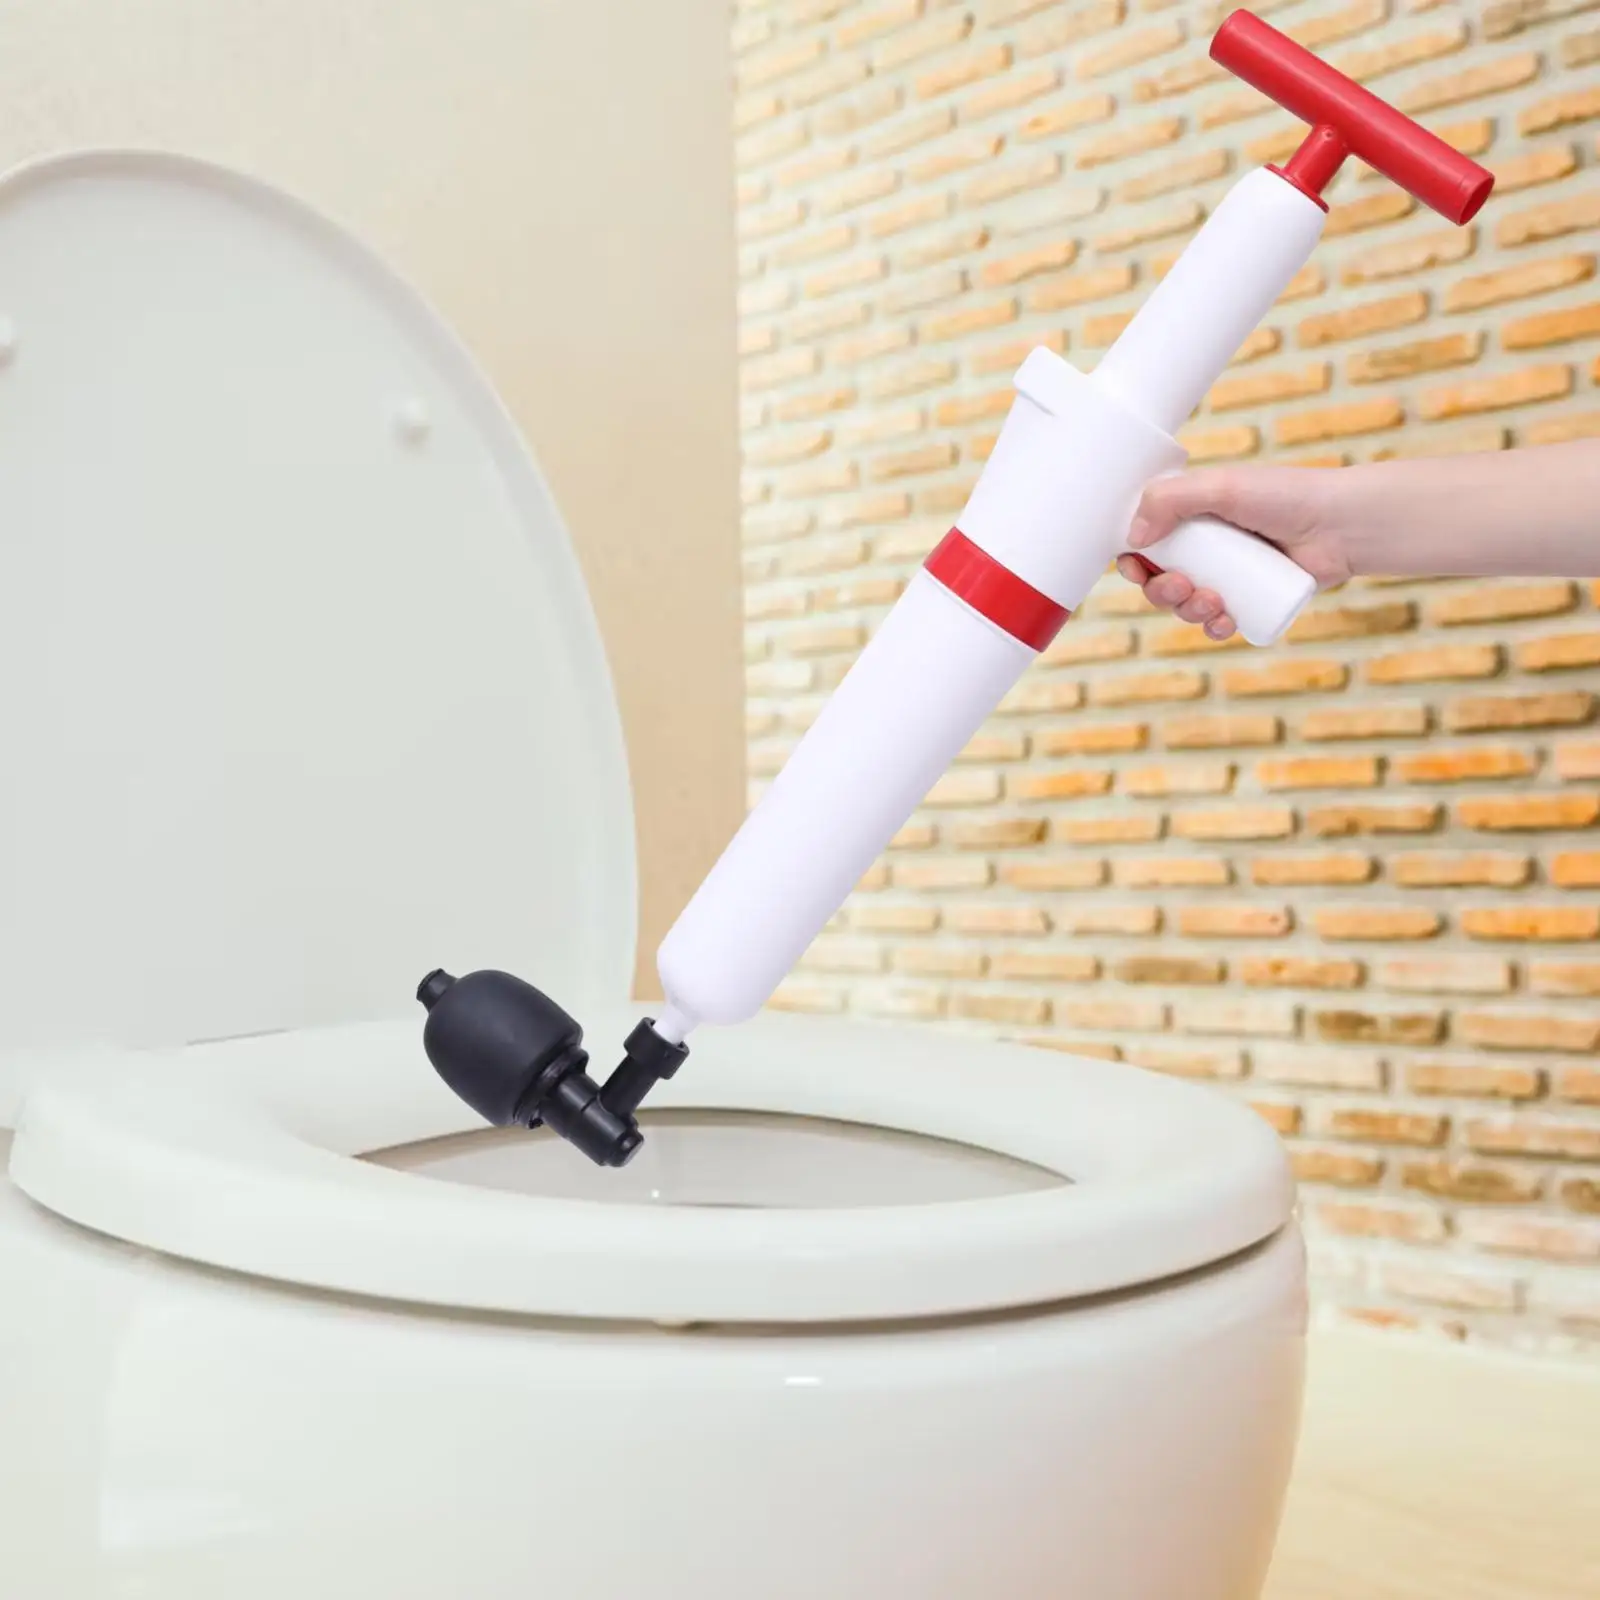 High Pressure Toilet Plunger Air Drain Blaster Clogged Pipe Floor Drain Clog Remover Air Toilet Unclogger for Kitchen Sink Hotel